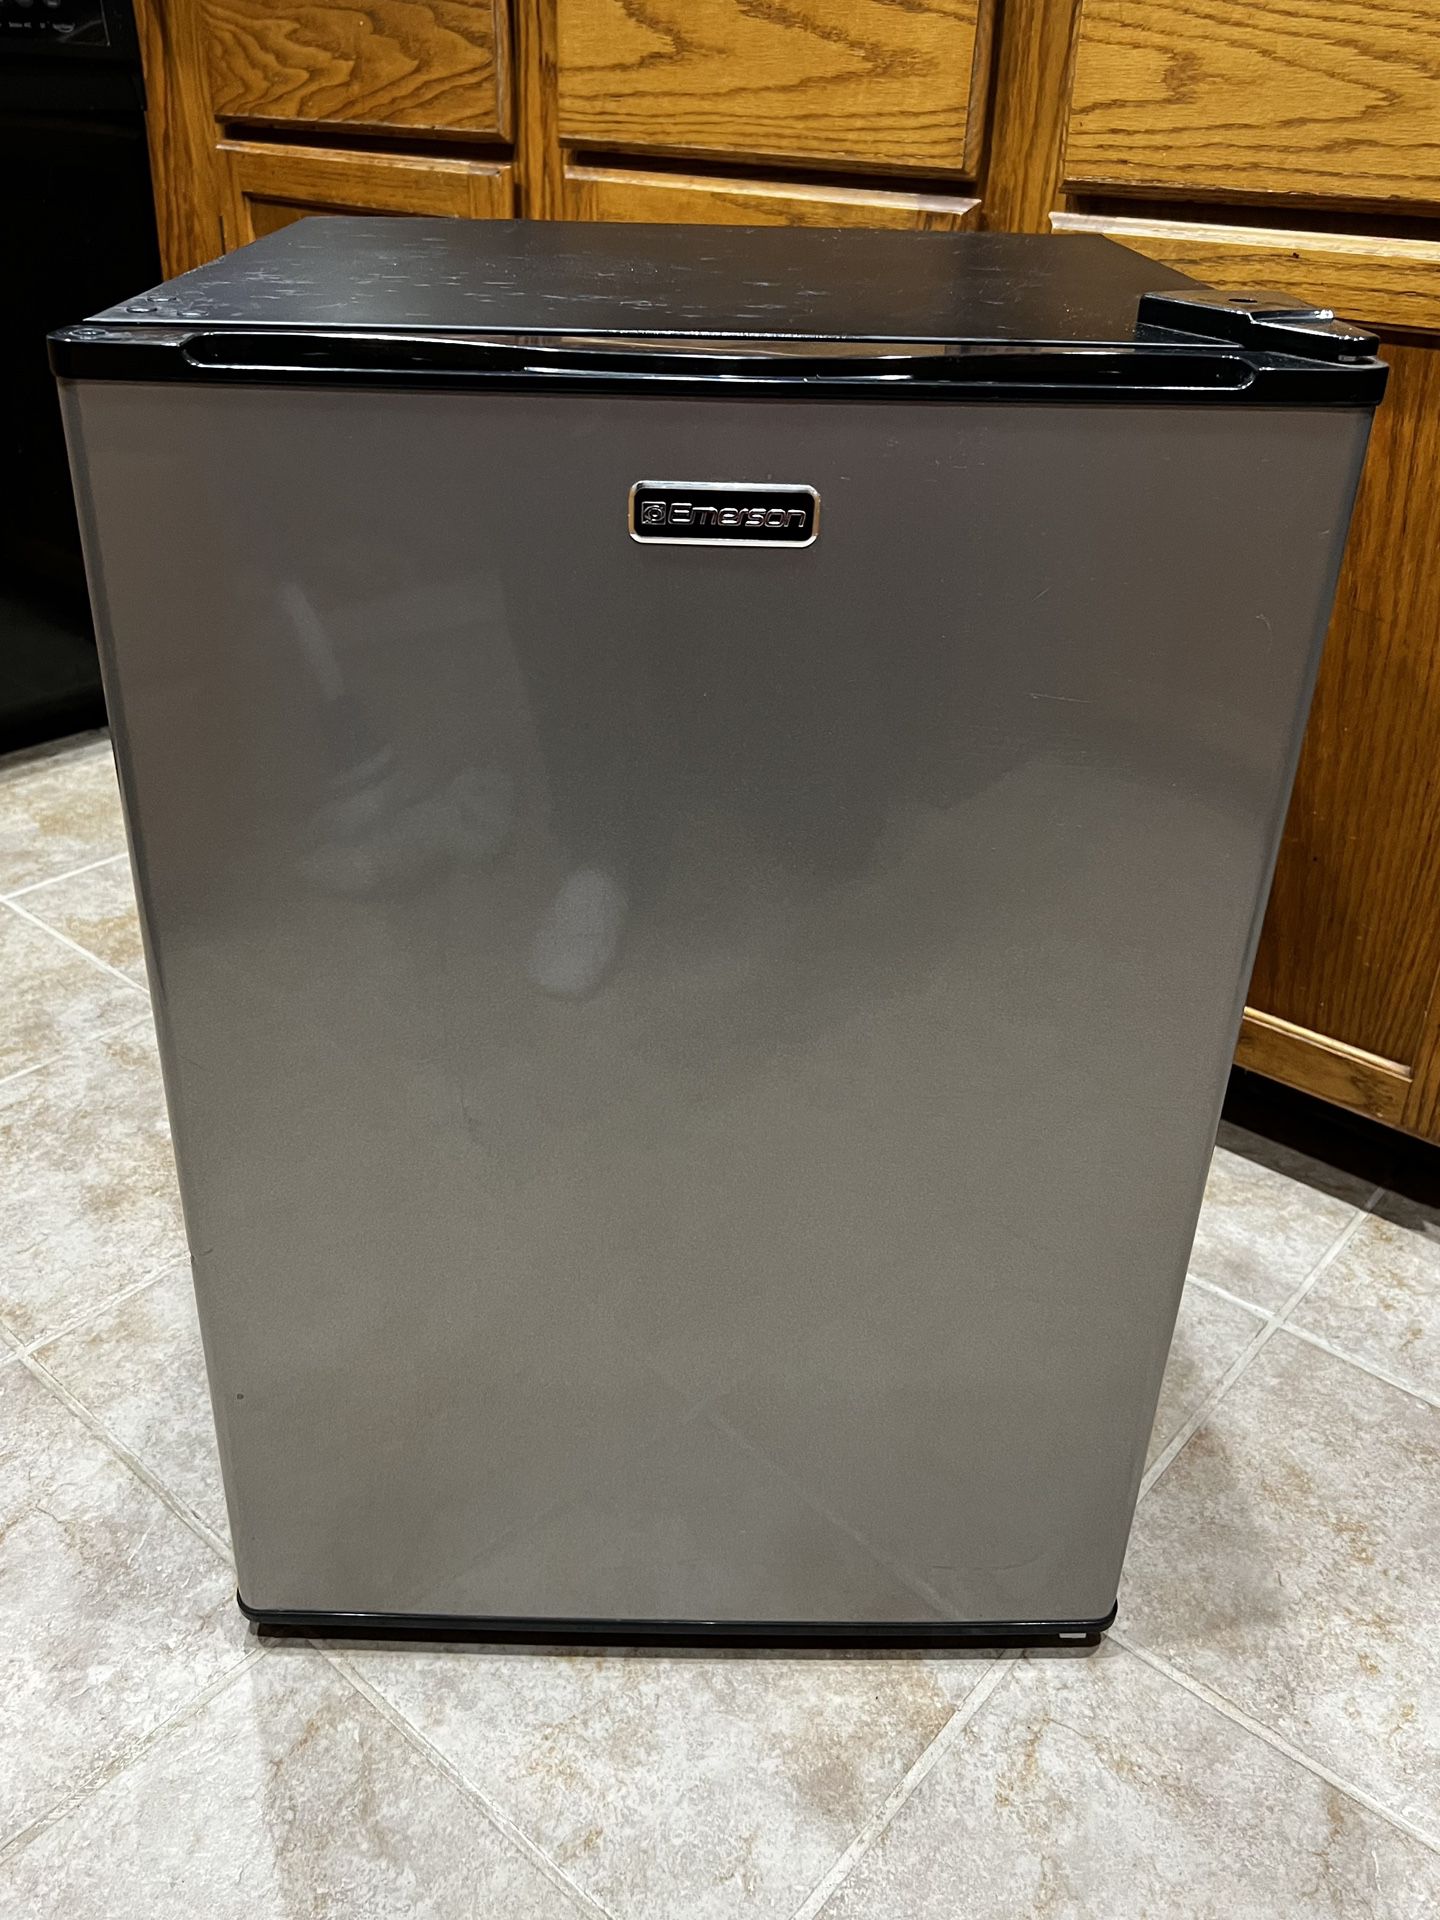 Emerson Compact Refrigerator for Sale in Woodinville, WA - OfferUp